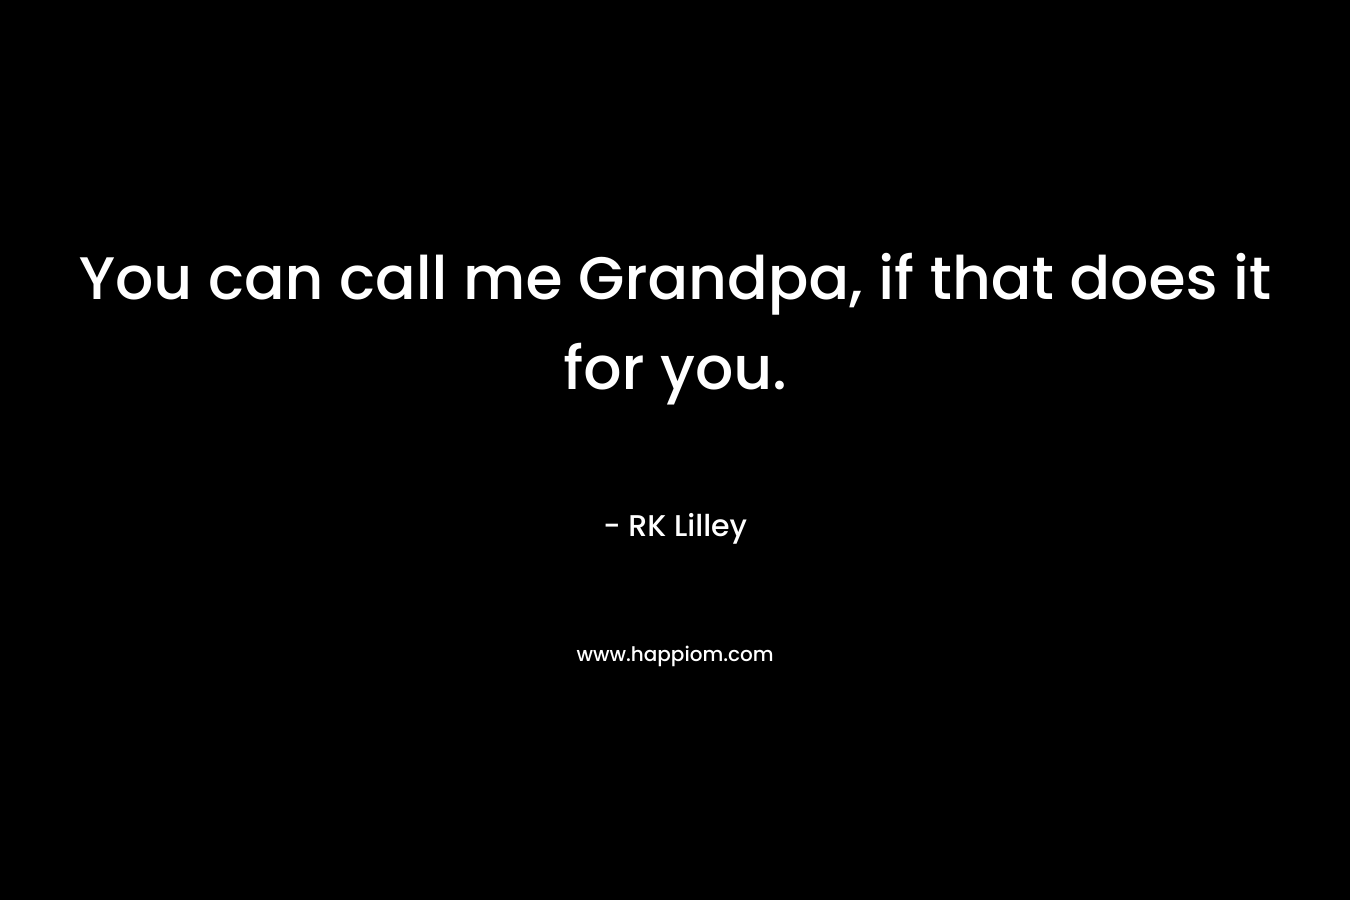 You can call me Grandpa, if that does it for you. – RK Lilley